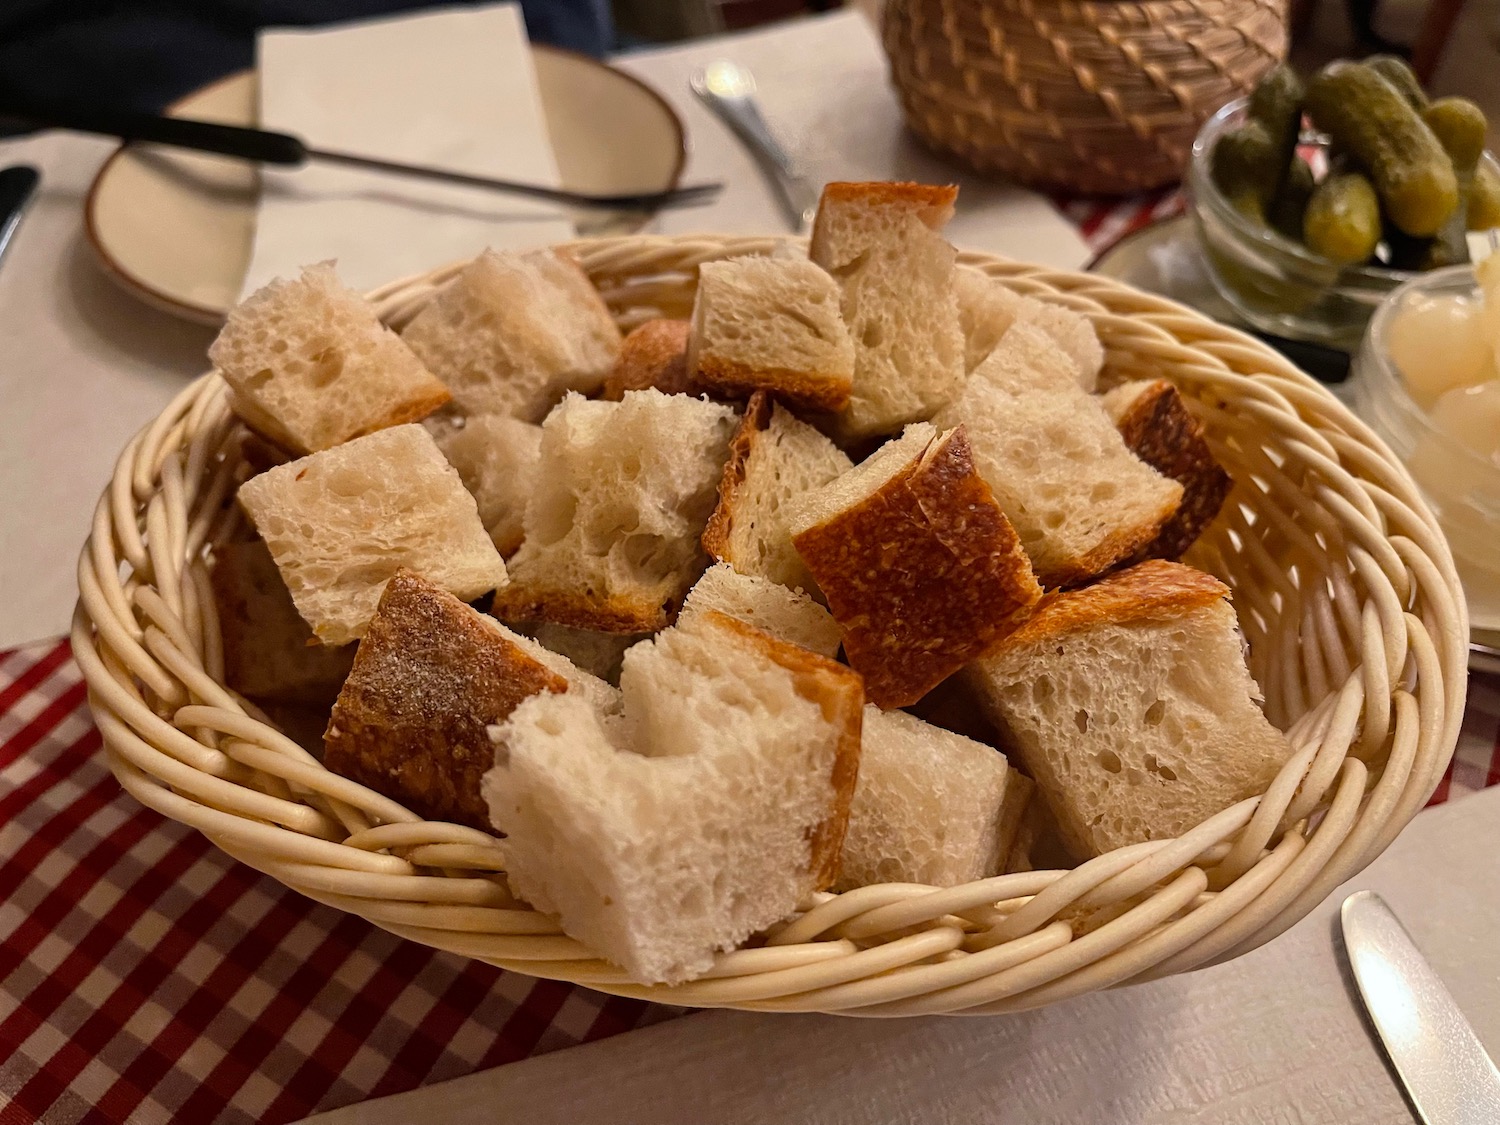 a basket of bread in a table